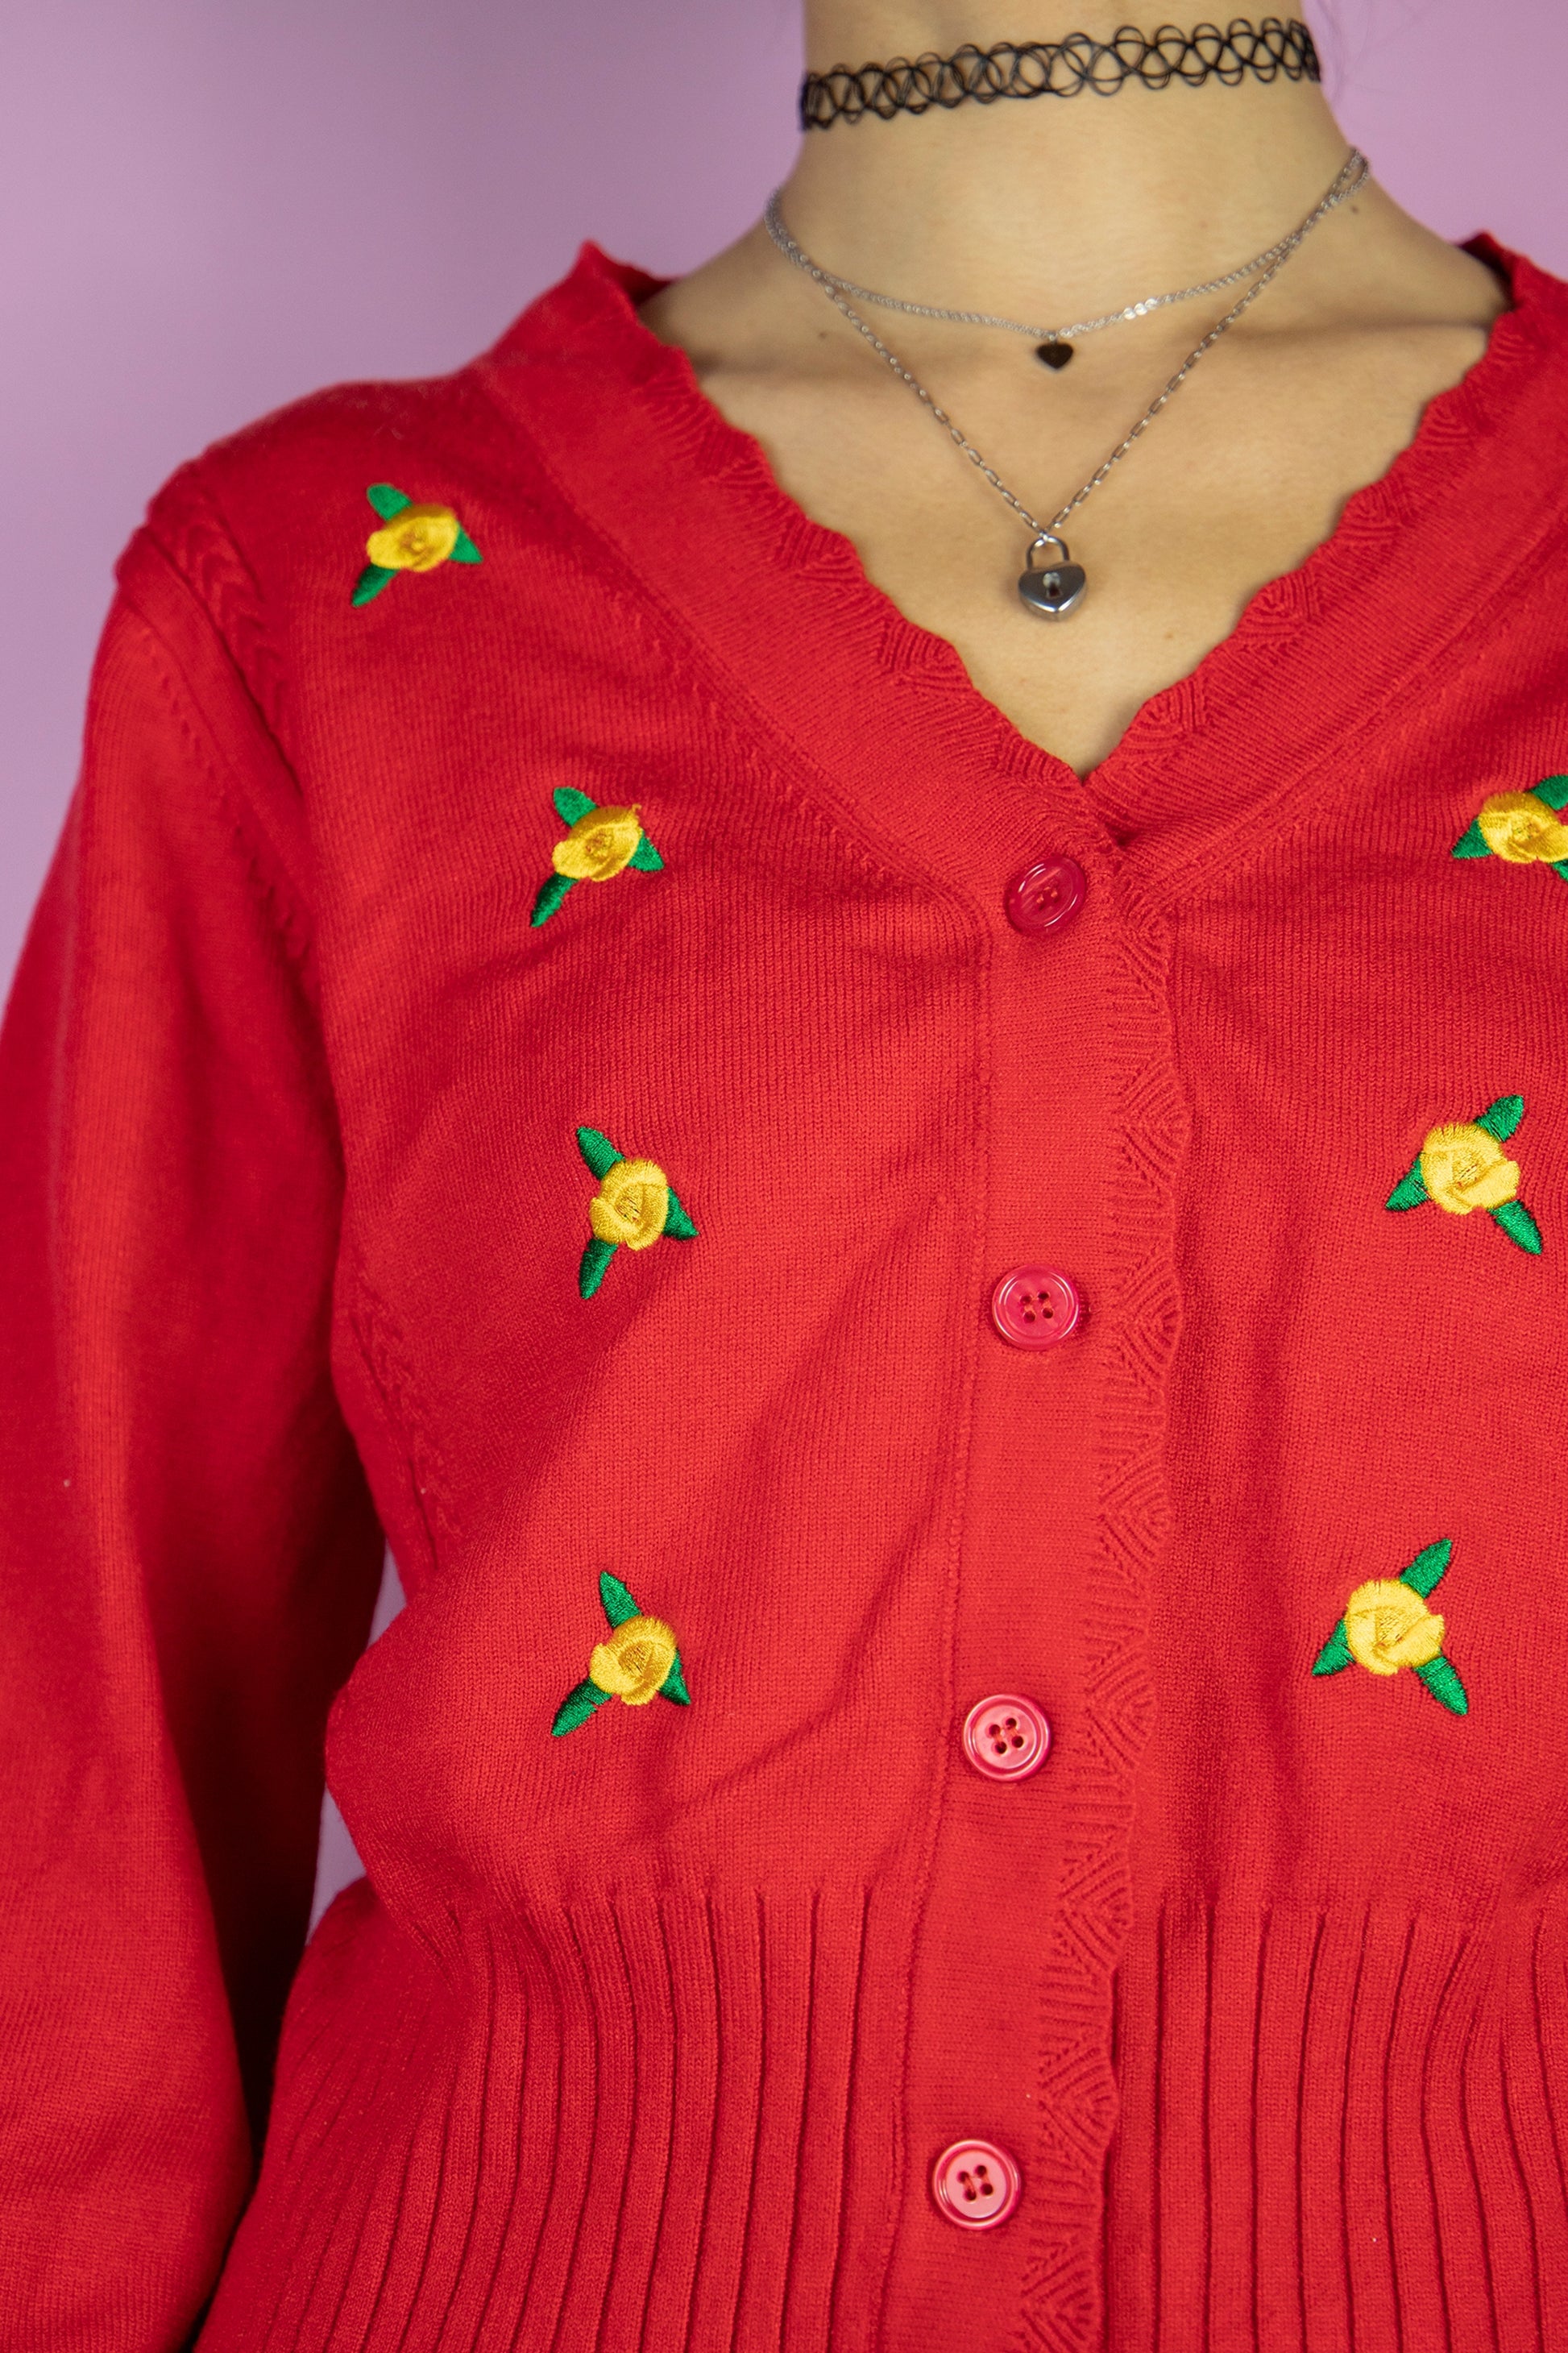 The Vintage 90s Red Floral Knit Cardigan is a cardigan adorned with embroidered floral details. Boho retro 1990s knitted sweater.